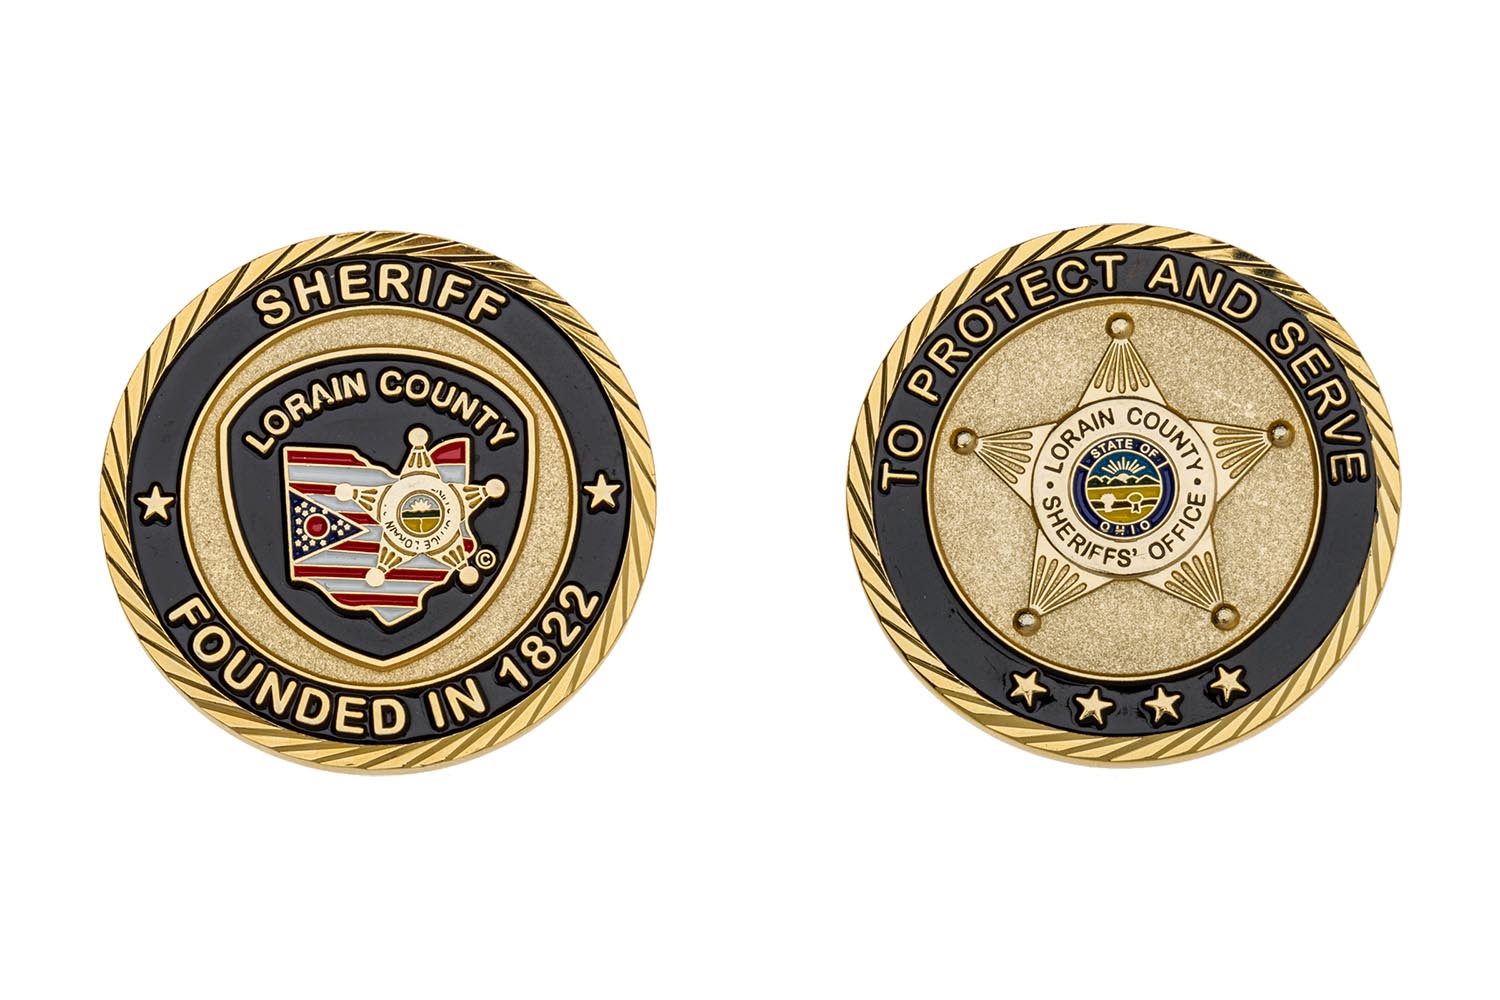 Metal sheriff coins